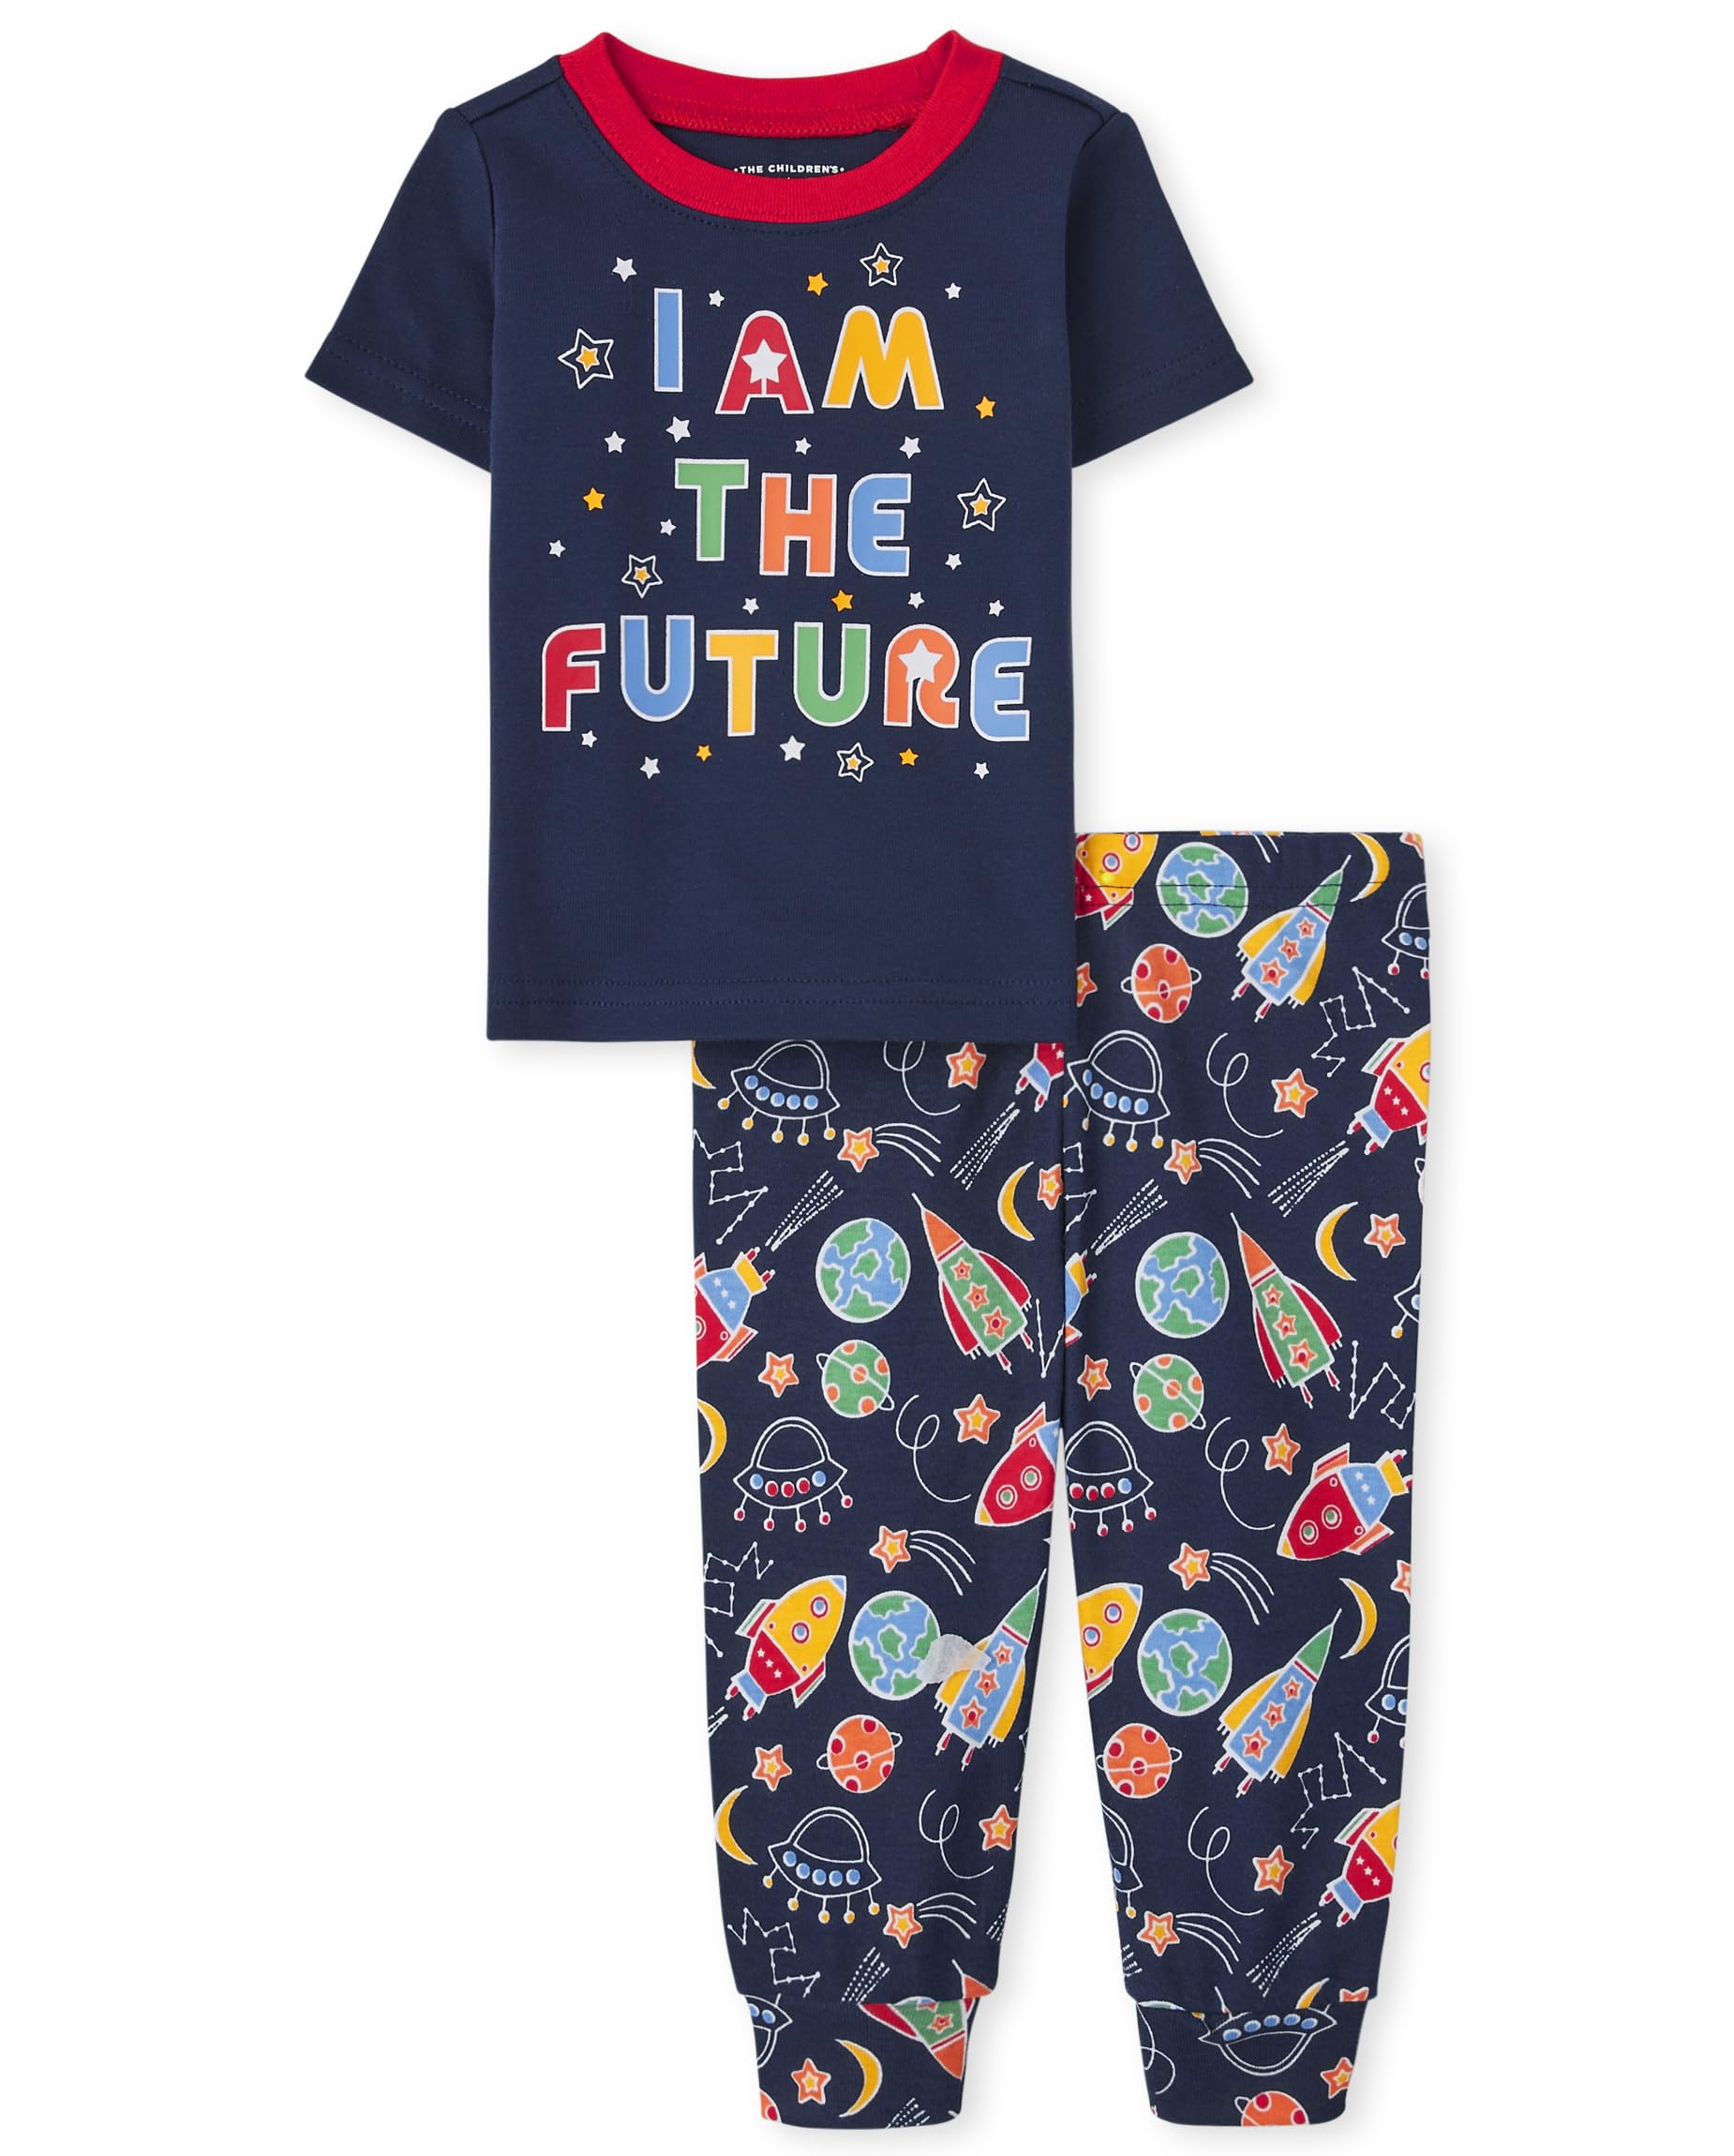 The Children's Place unisex baby The Children's Place Toddler Short Sleeve Top and Pants Snug Fit 100% Cotton 2 Piece Pajama Set, Glow-i Am the Future, 2T US